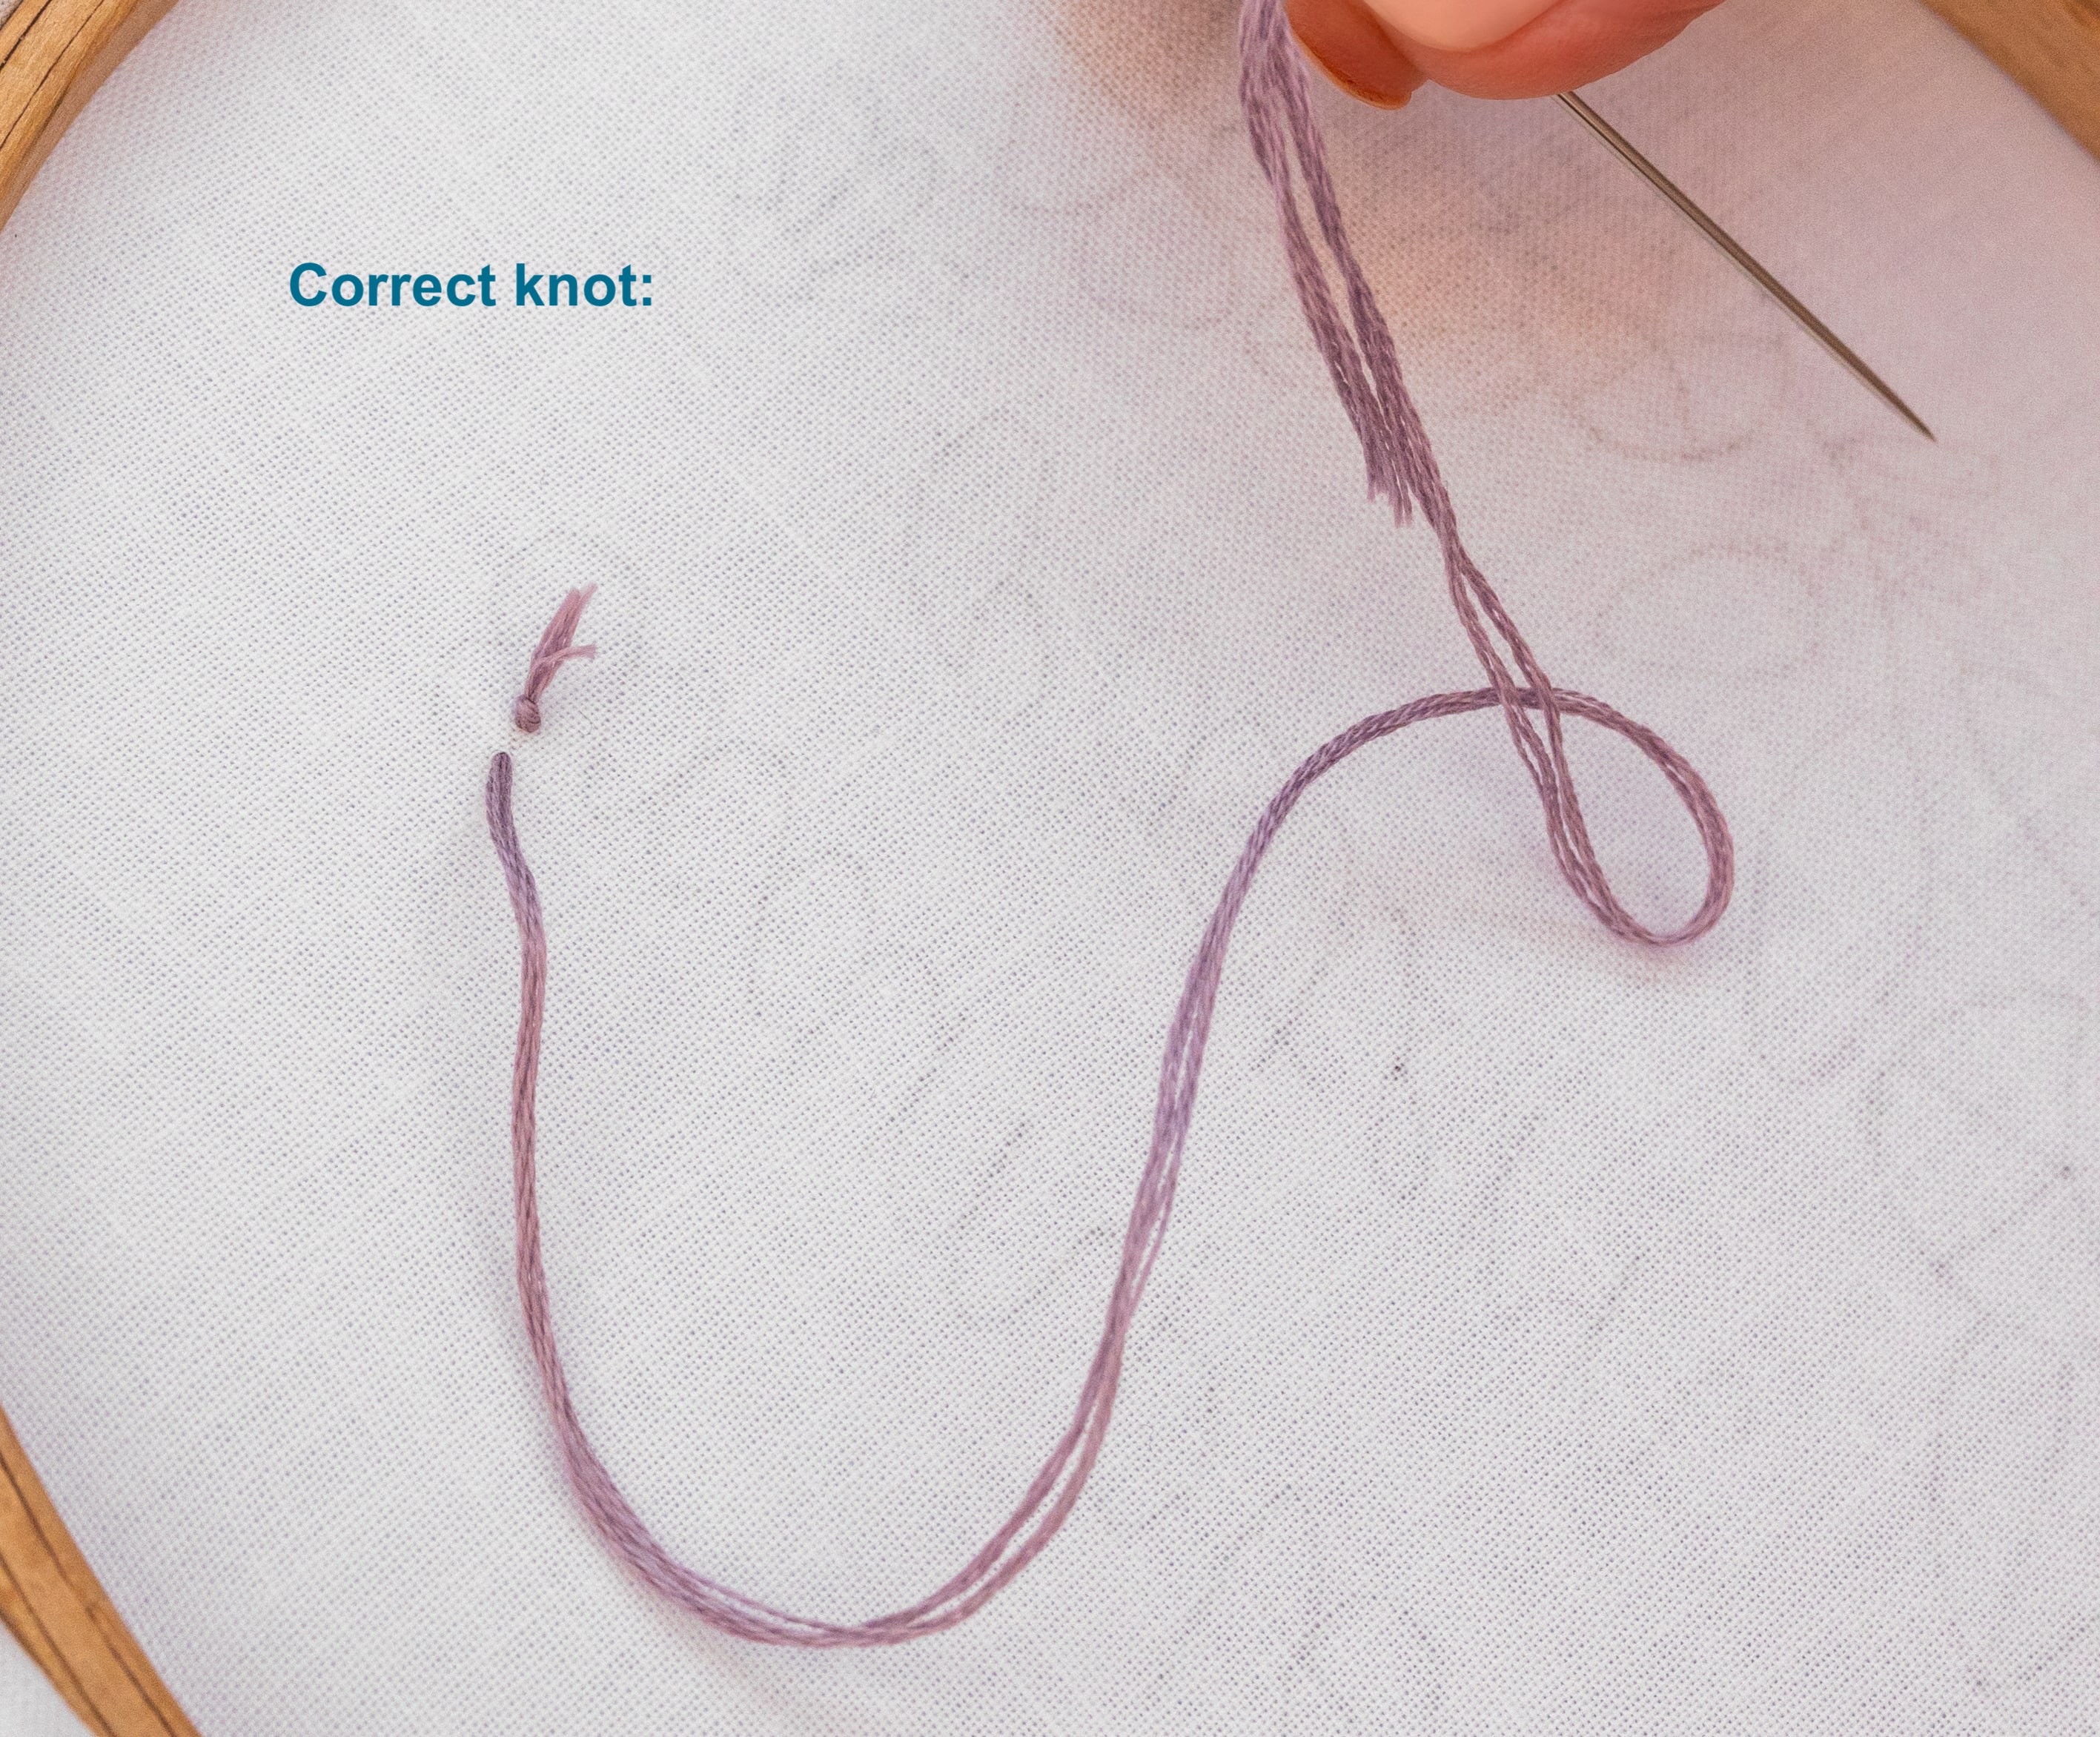 This is an image of a correct knot at the back of an embroidery pattern.